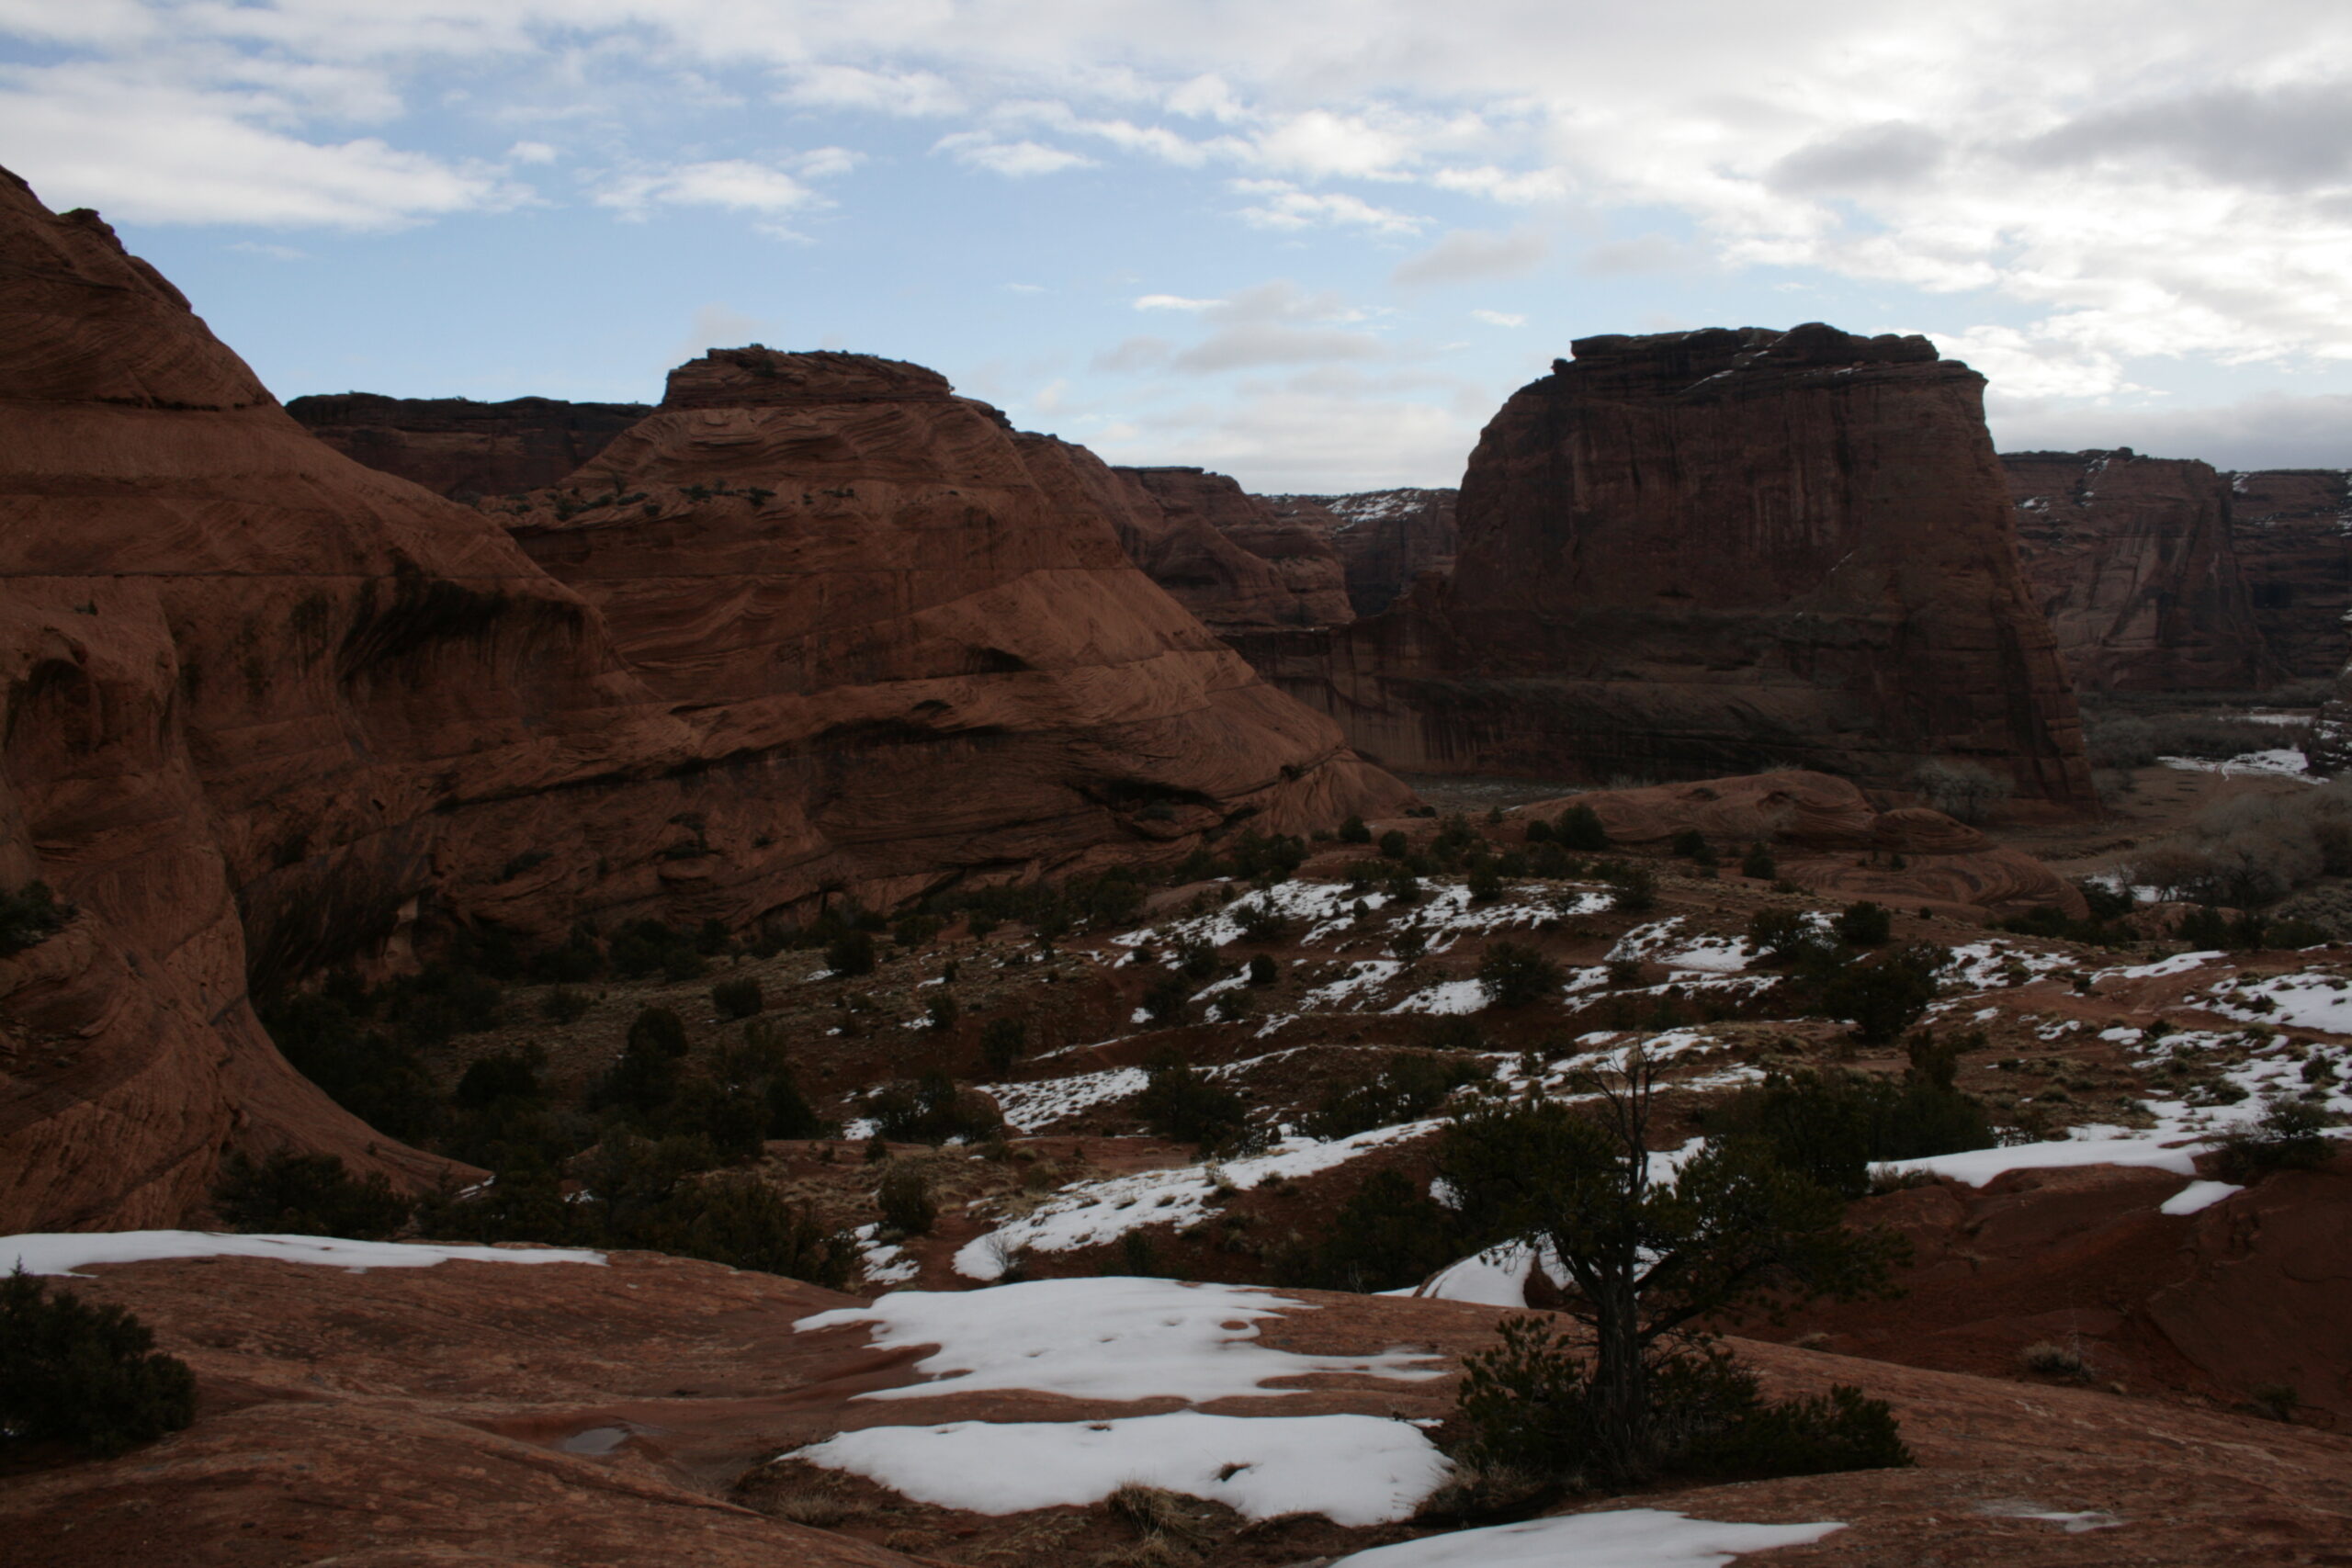 A view of Canyon de Chelly National Monument